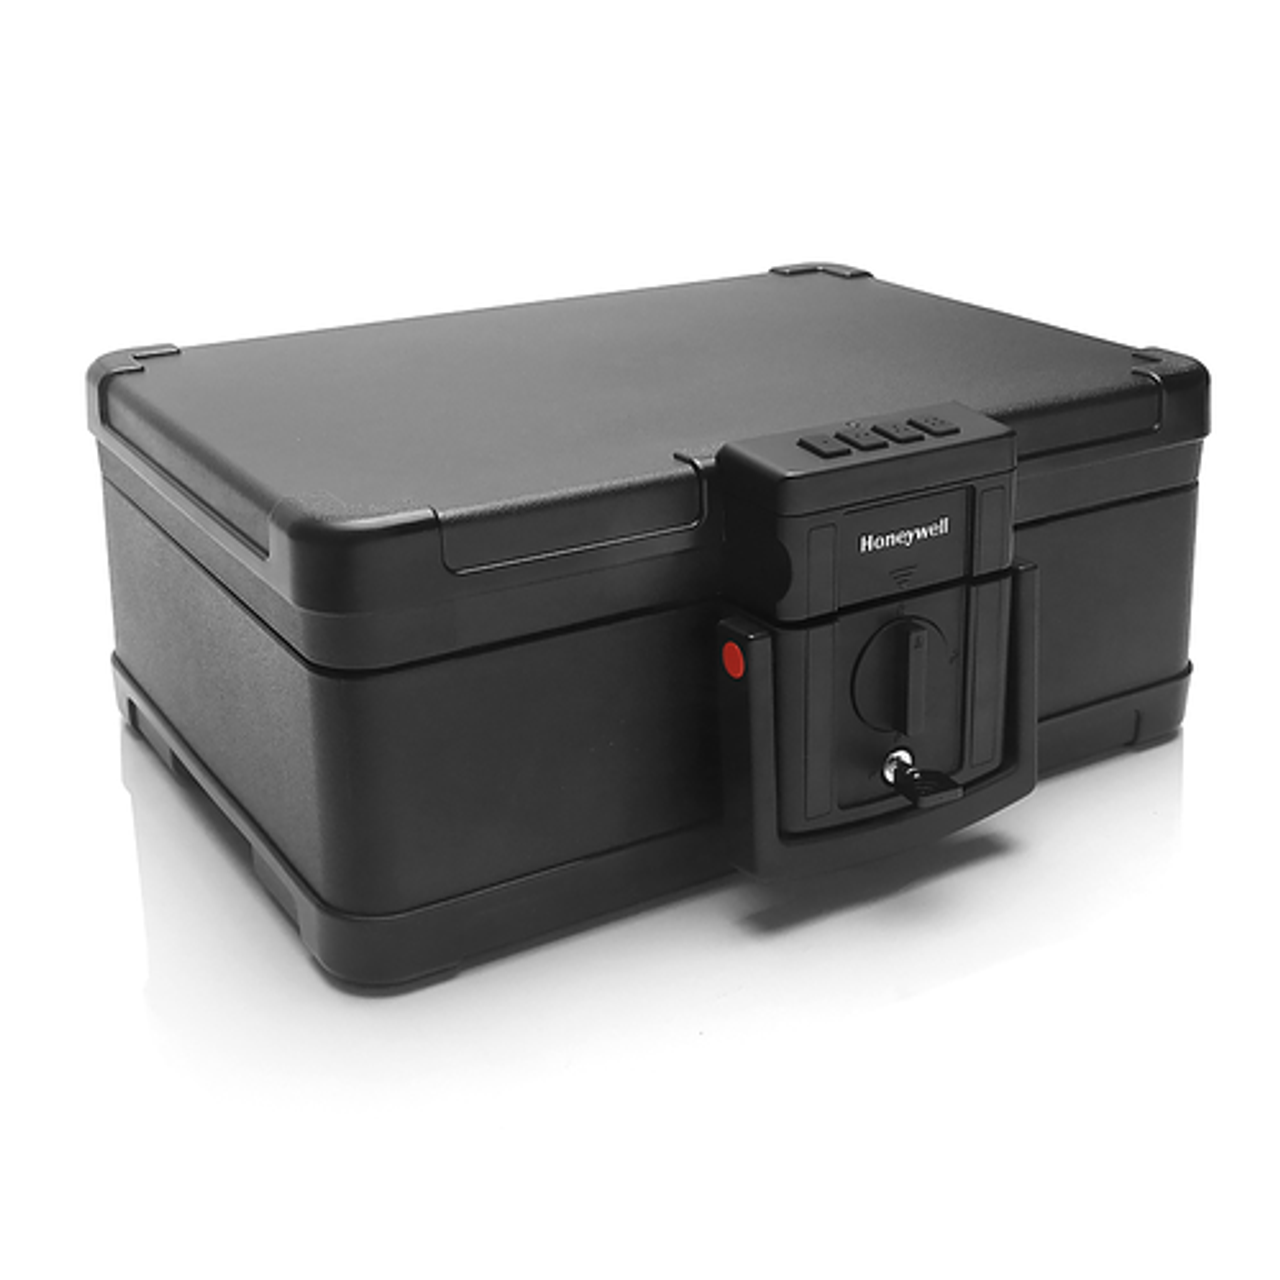 Honeywell Digital Fire and Water Chest - black